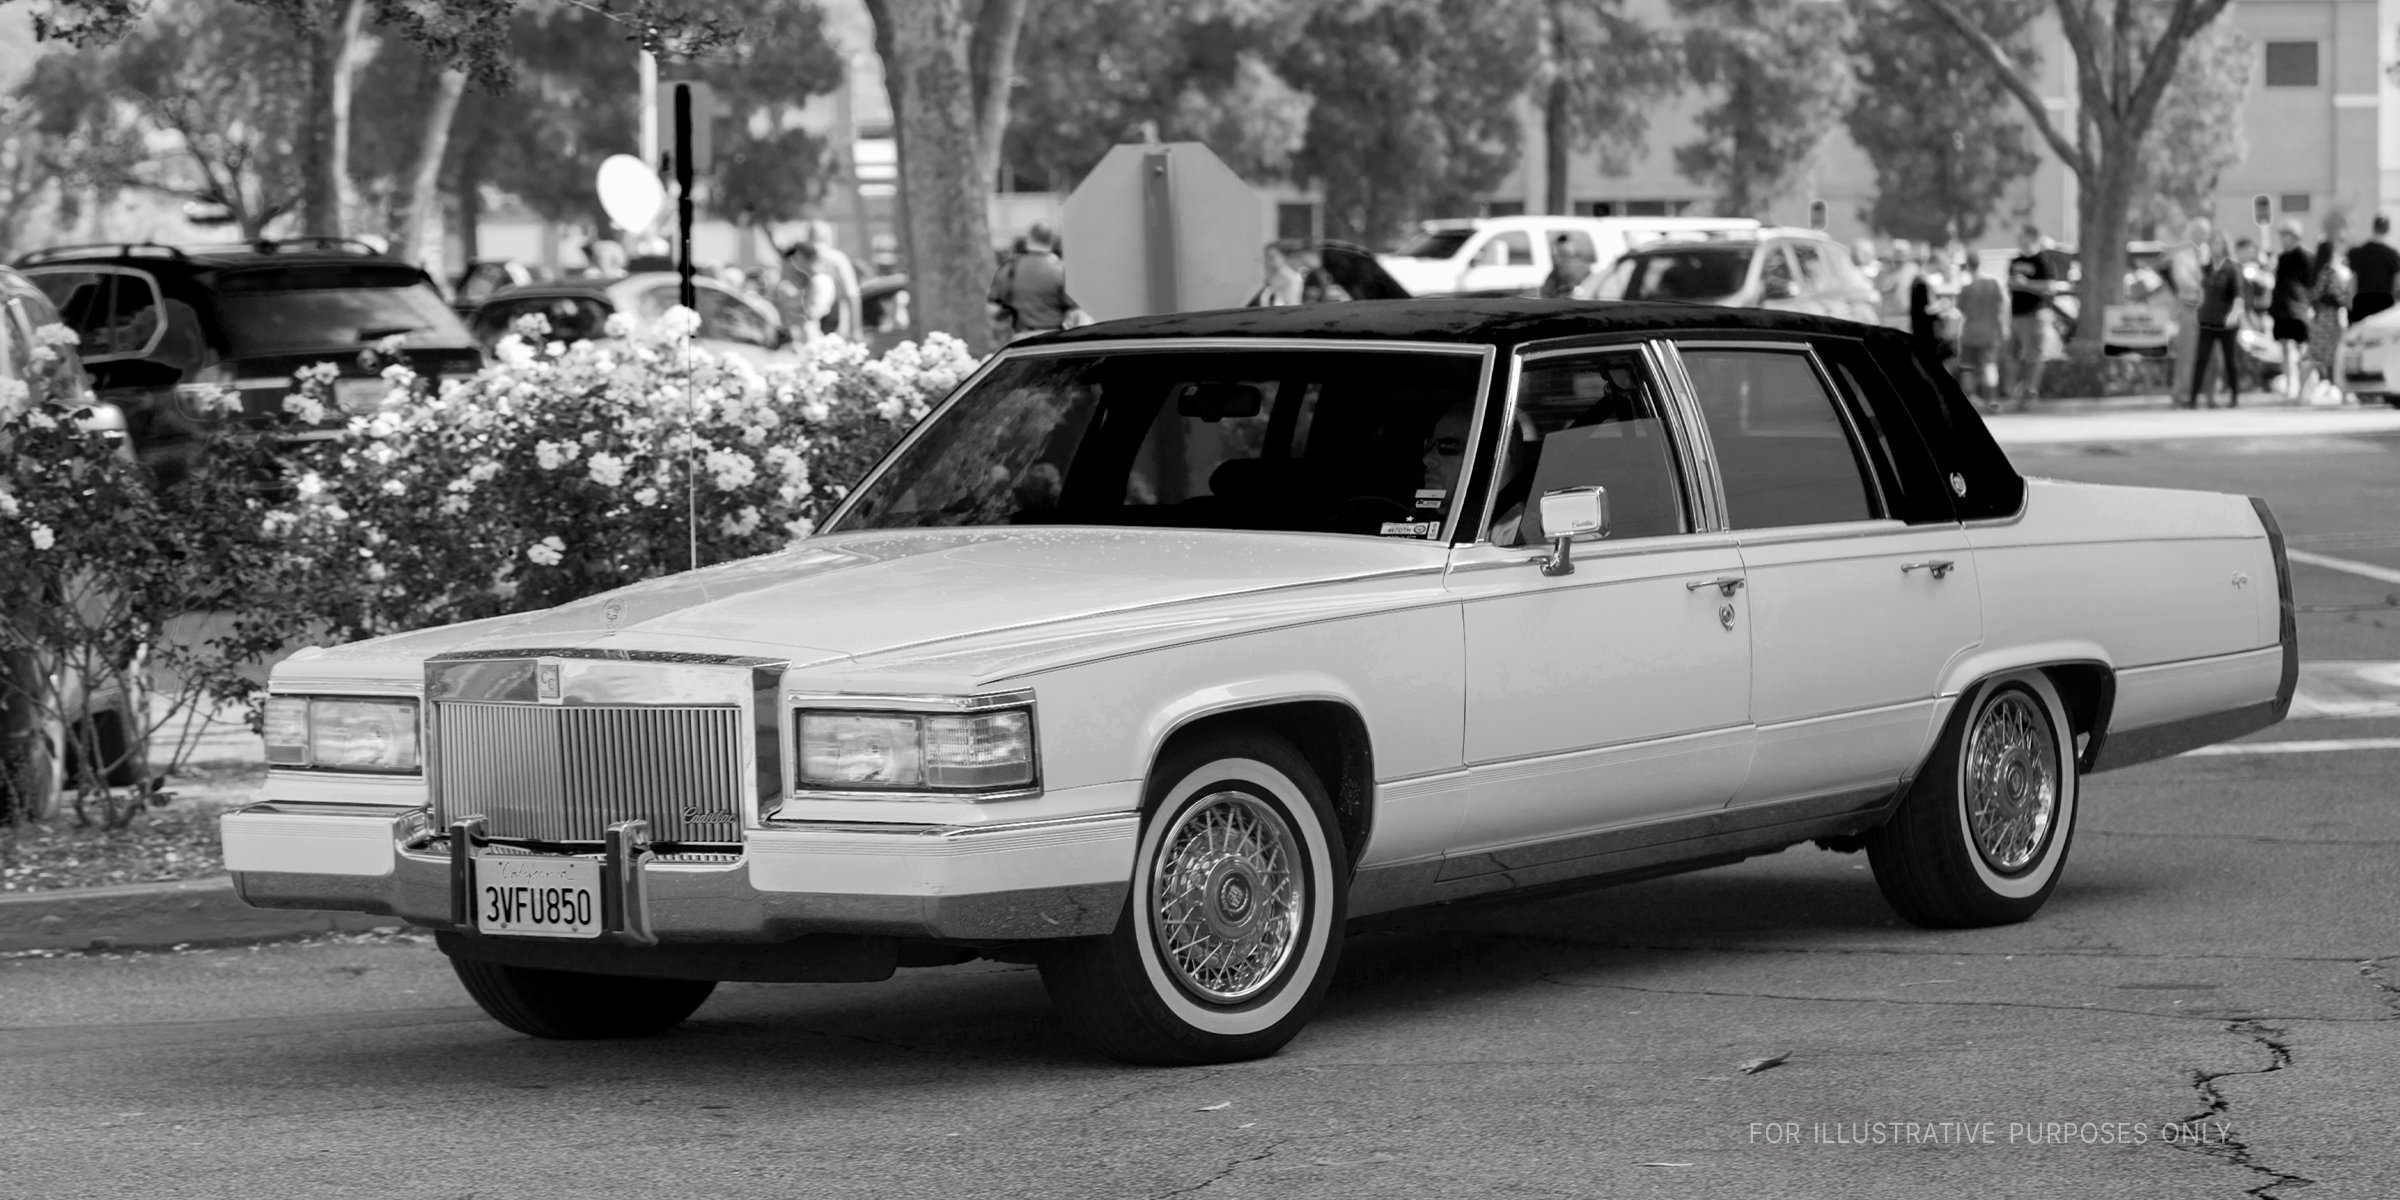 Cadillac Seville classic car on road | Source: Shutterstock